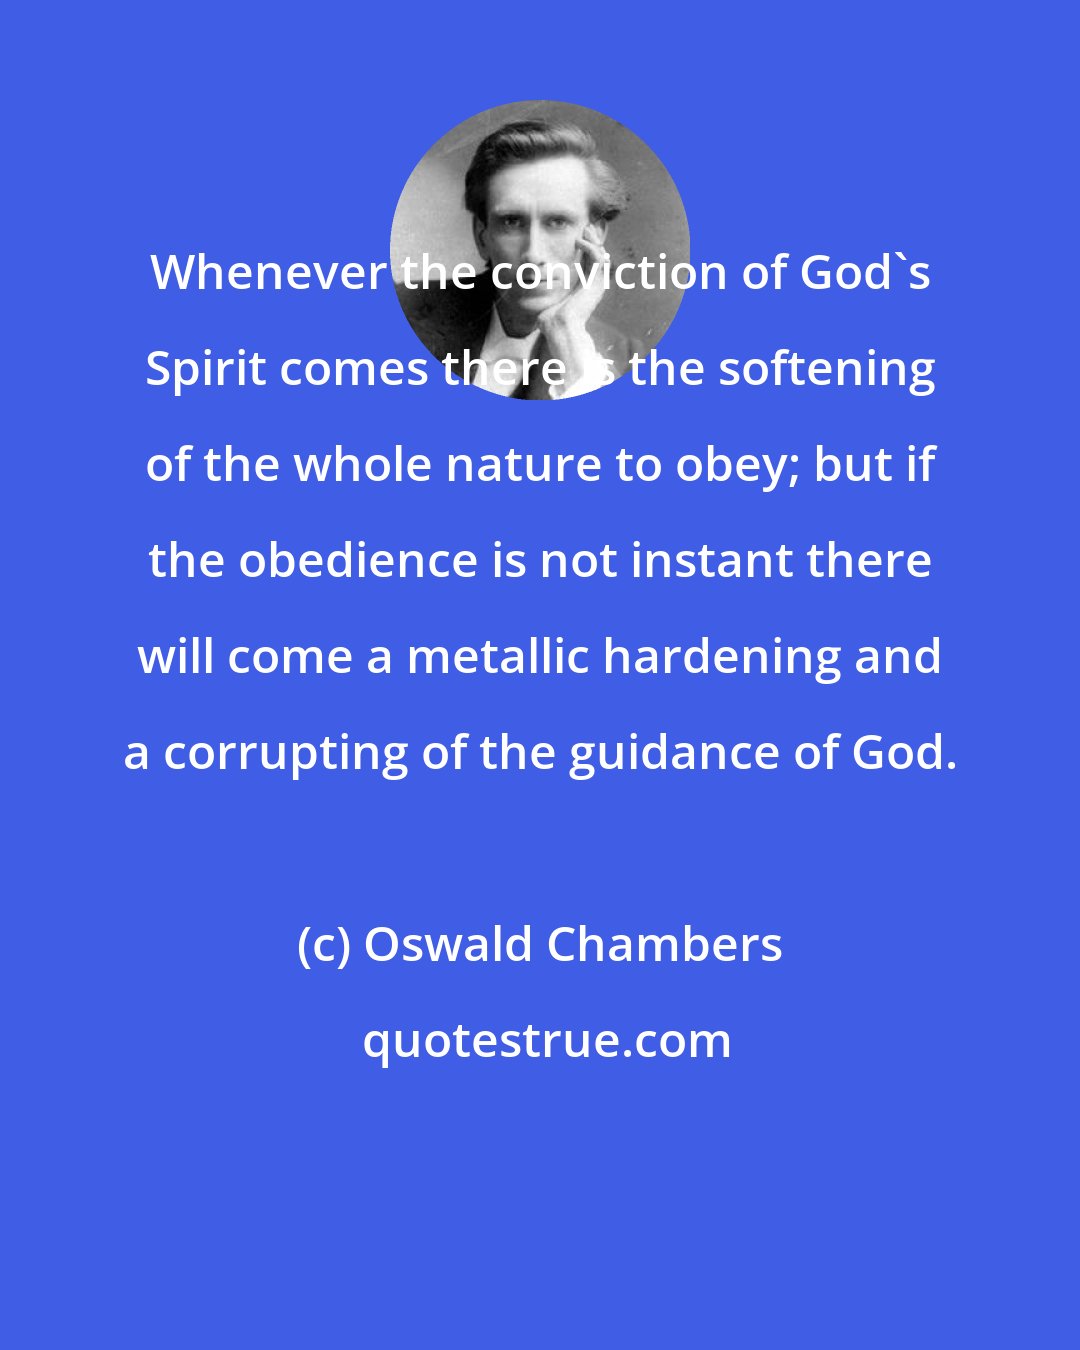 Oswald Chambers: Whenever the conviction of God's Spirit comes there is the softening of the whole nature to obey; but if the obedience is not instant there will come a metallic hardening and a corrupting of the guidance of God.